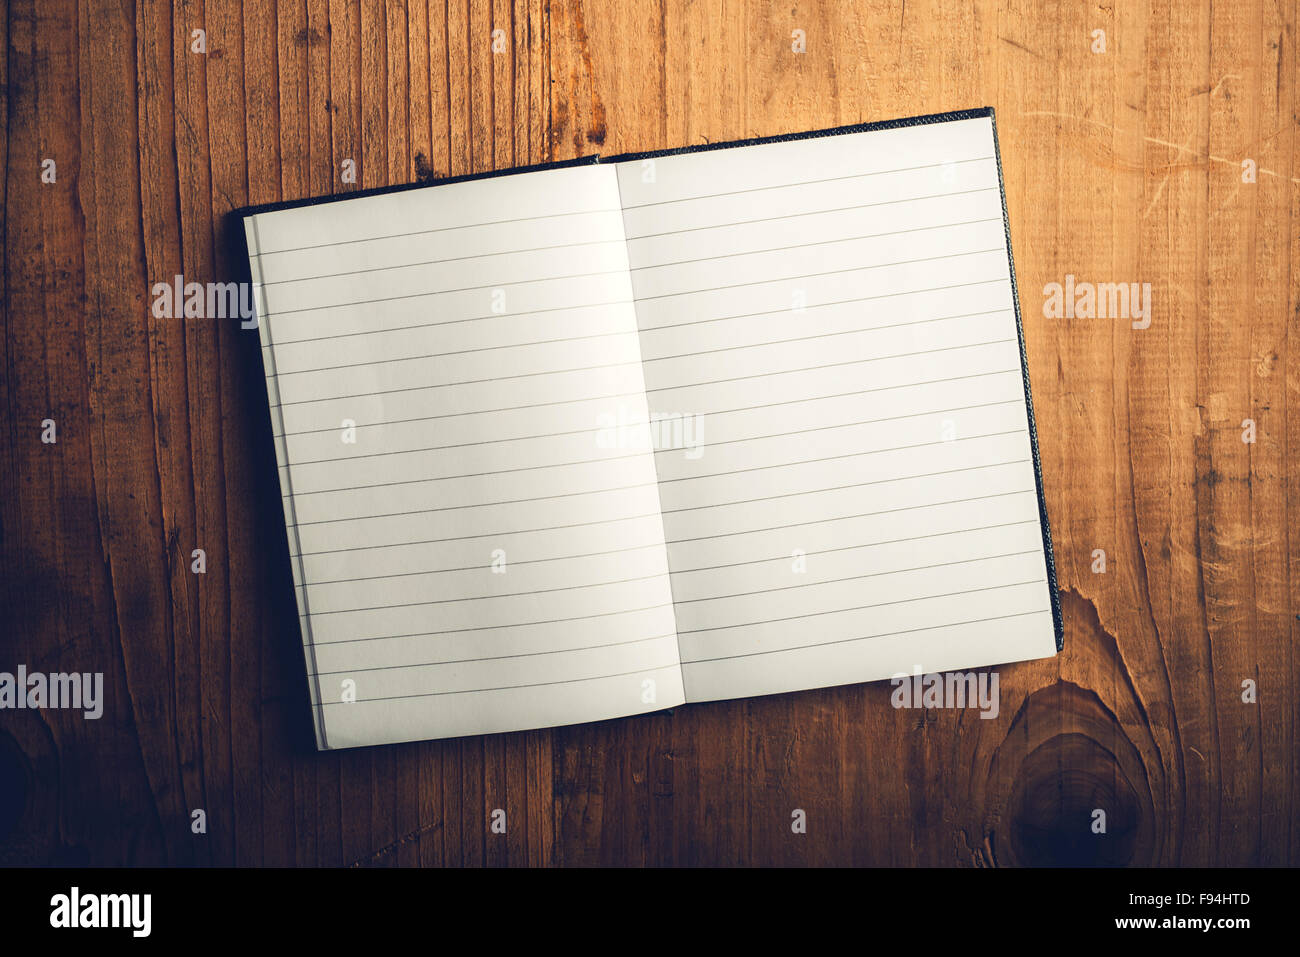 Top view of open notebook with blank pages on old wooden desk, retro toned image as copy space Stock Photo